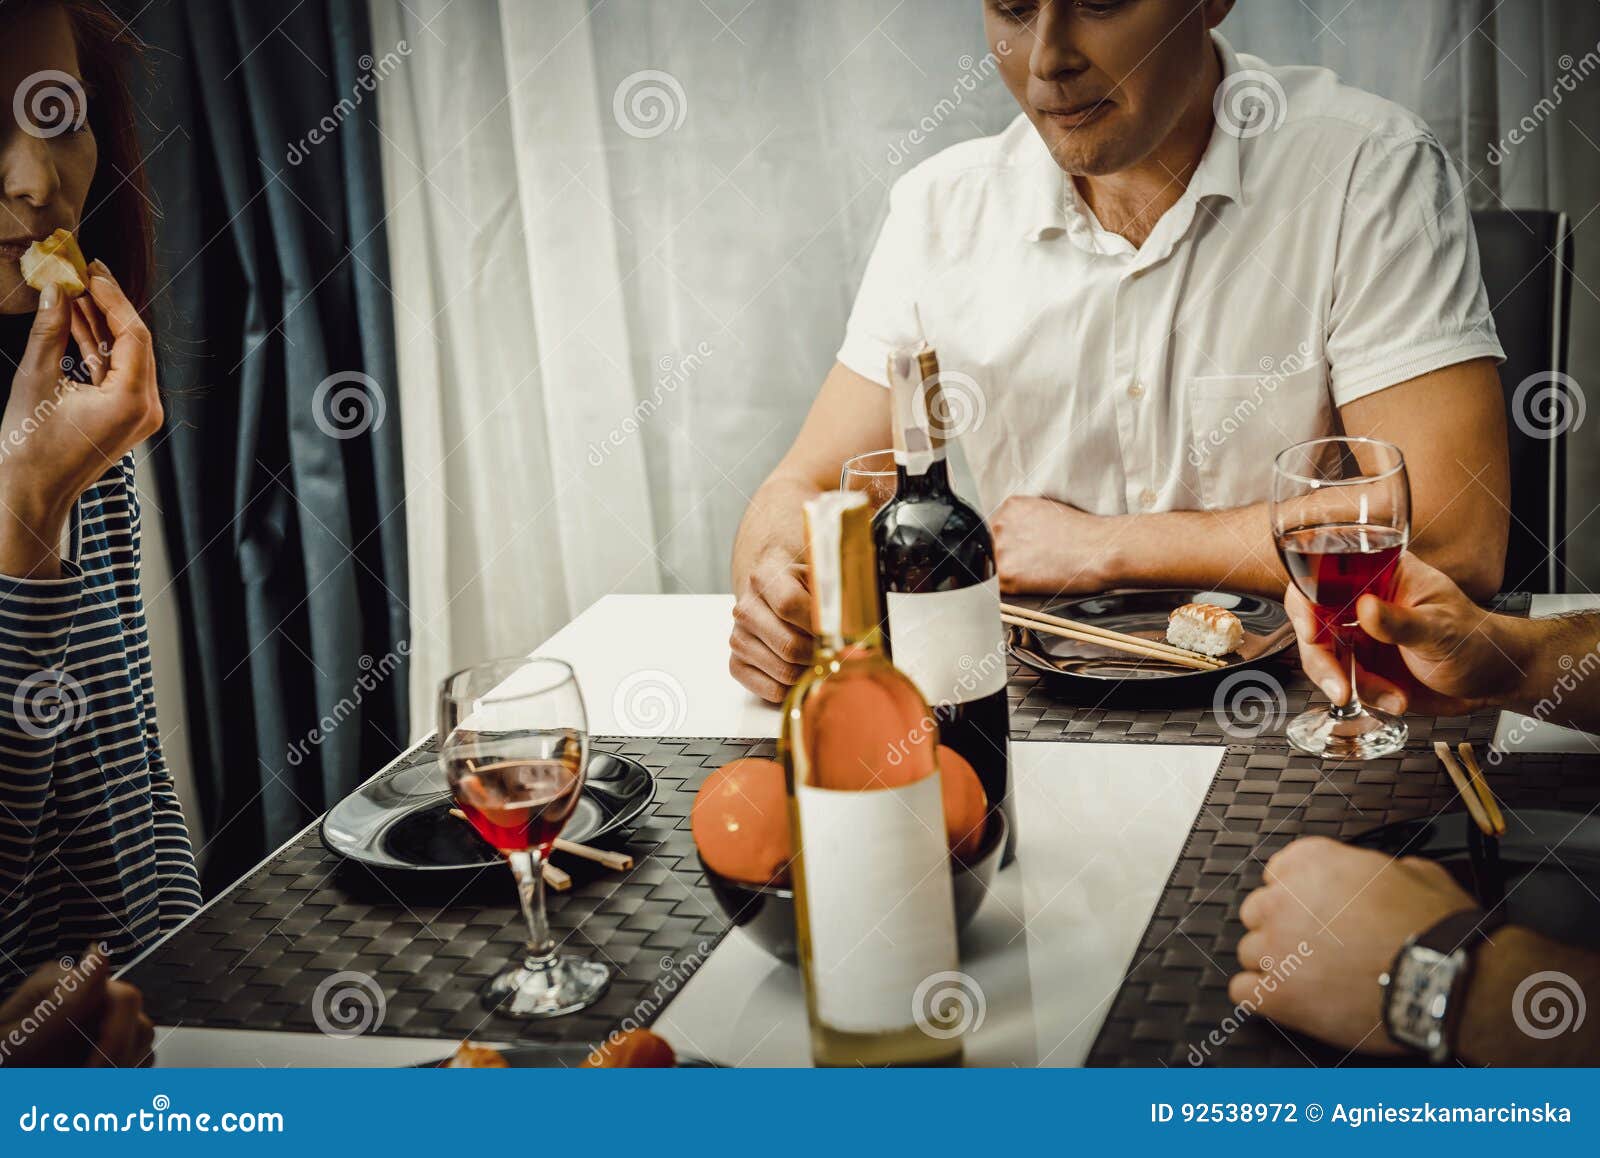 Dinner with friends. stock photo. Image of aged, caucasian - 92538972